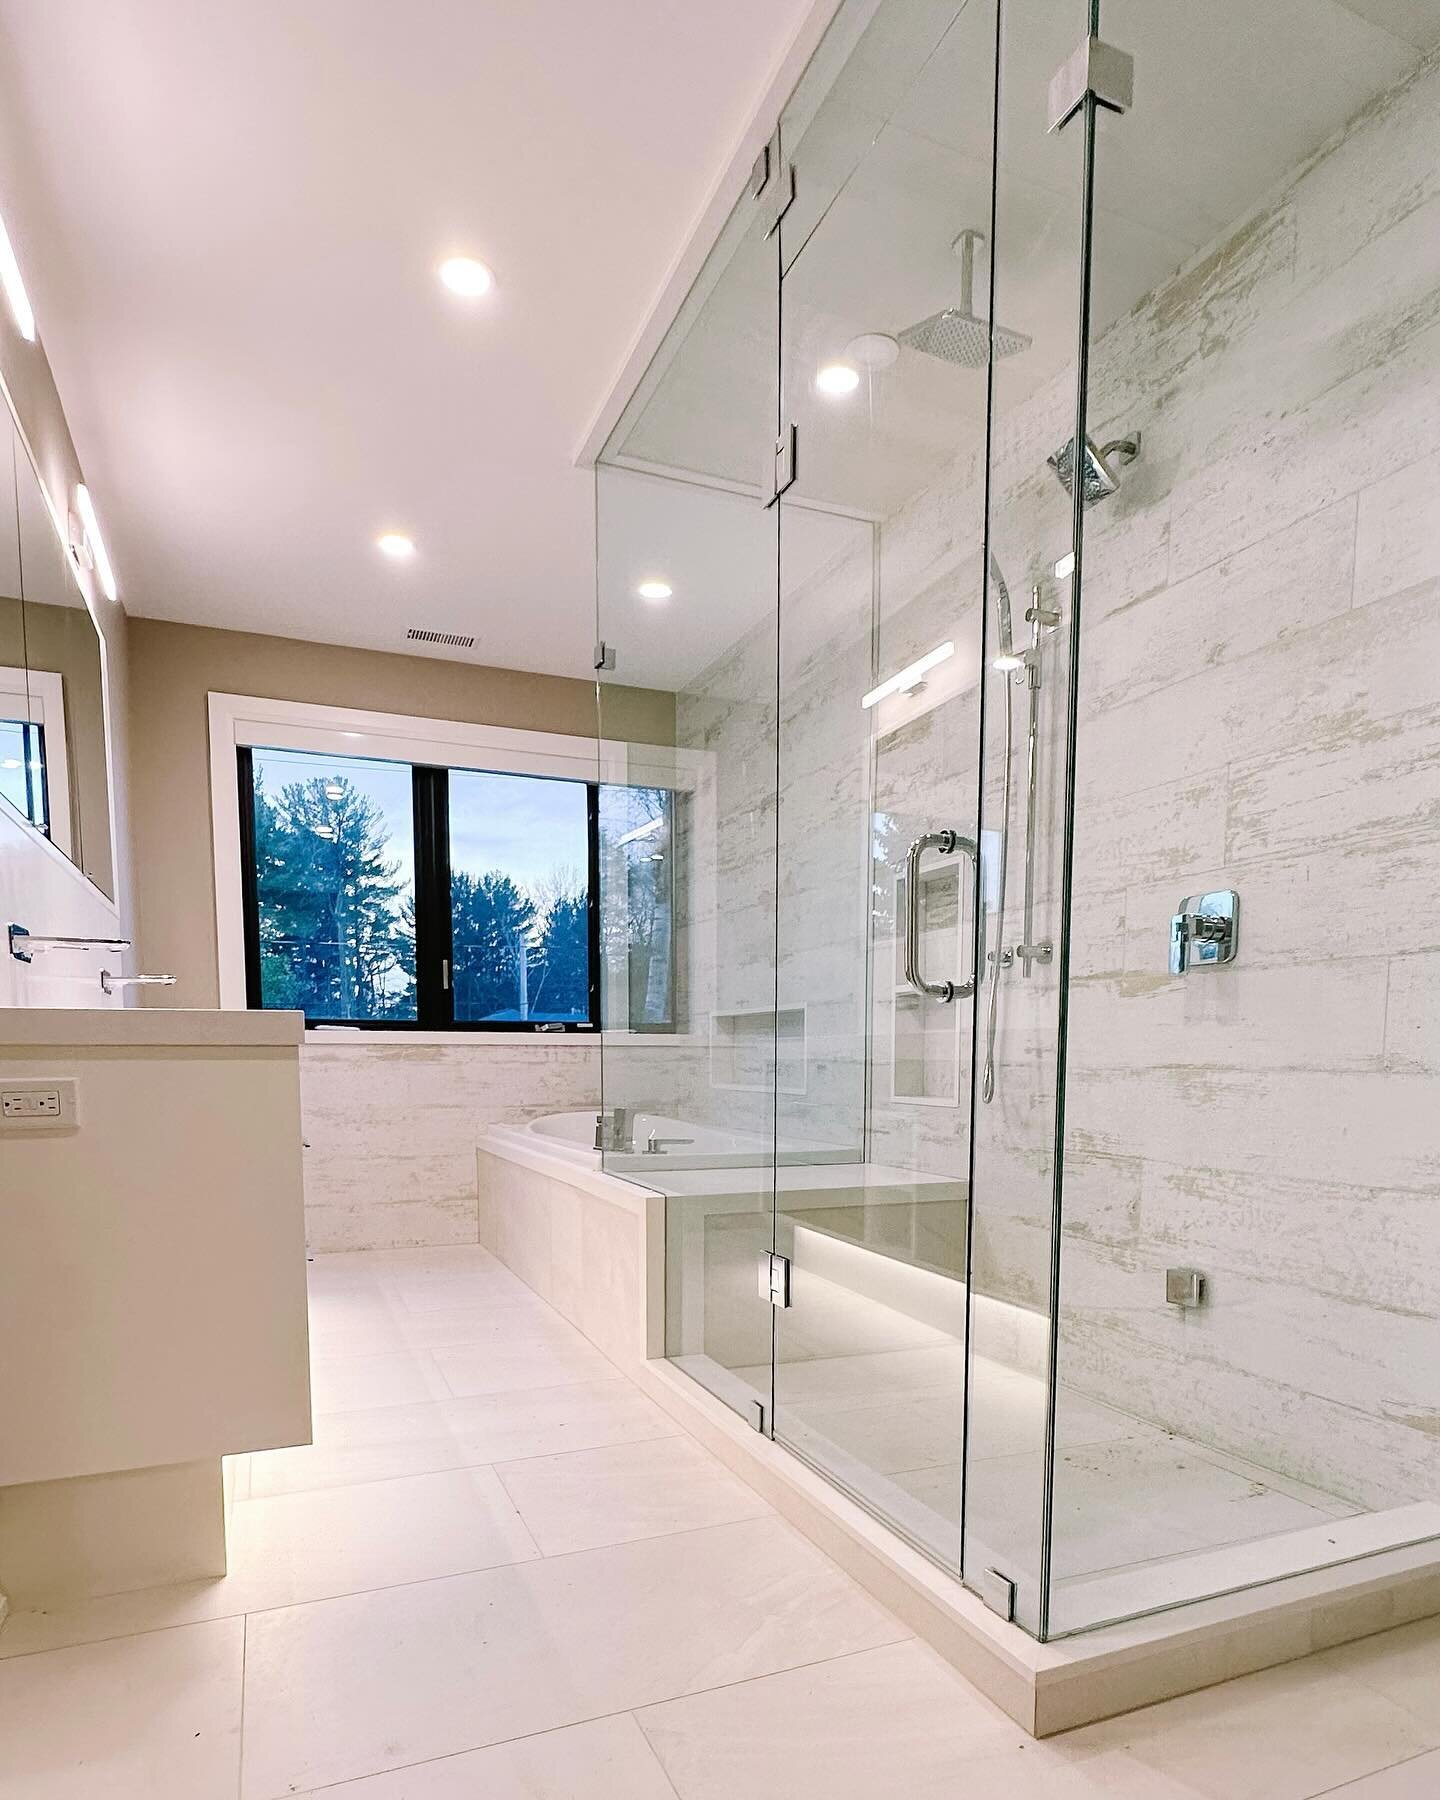 Happy Clients are now Enjoying this Beautiful Bathroom in their Custom Home on Lake Simcoe!☀️🏡!

#ConstructionCompany #DreamHome #LuxuryLiving  #FineDetails #Homebuilder #exteriordesign #HomeGoals #ConstructionLife #DreamHomeGoals #customhomes #home